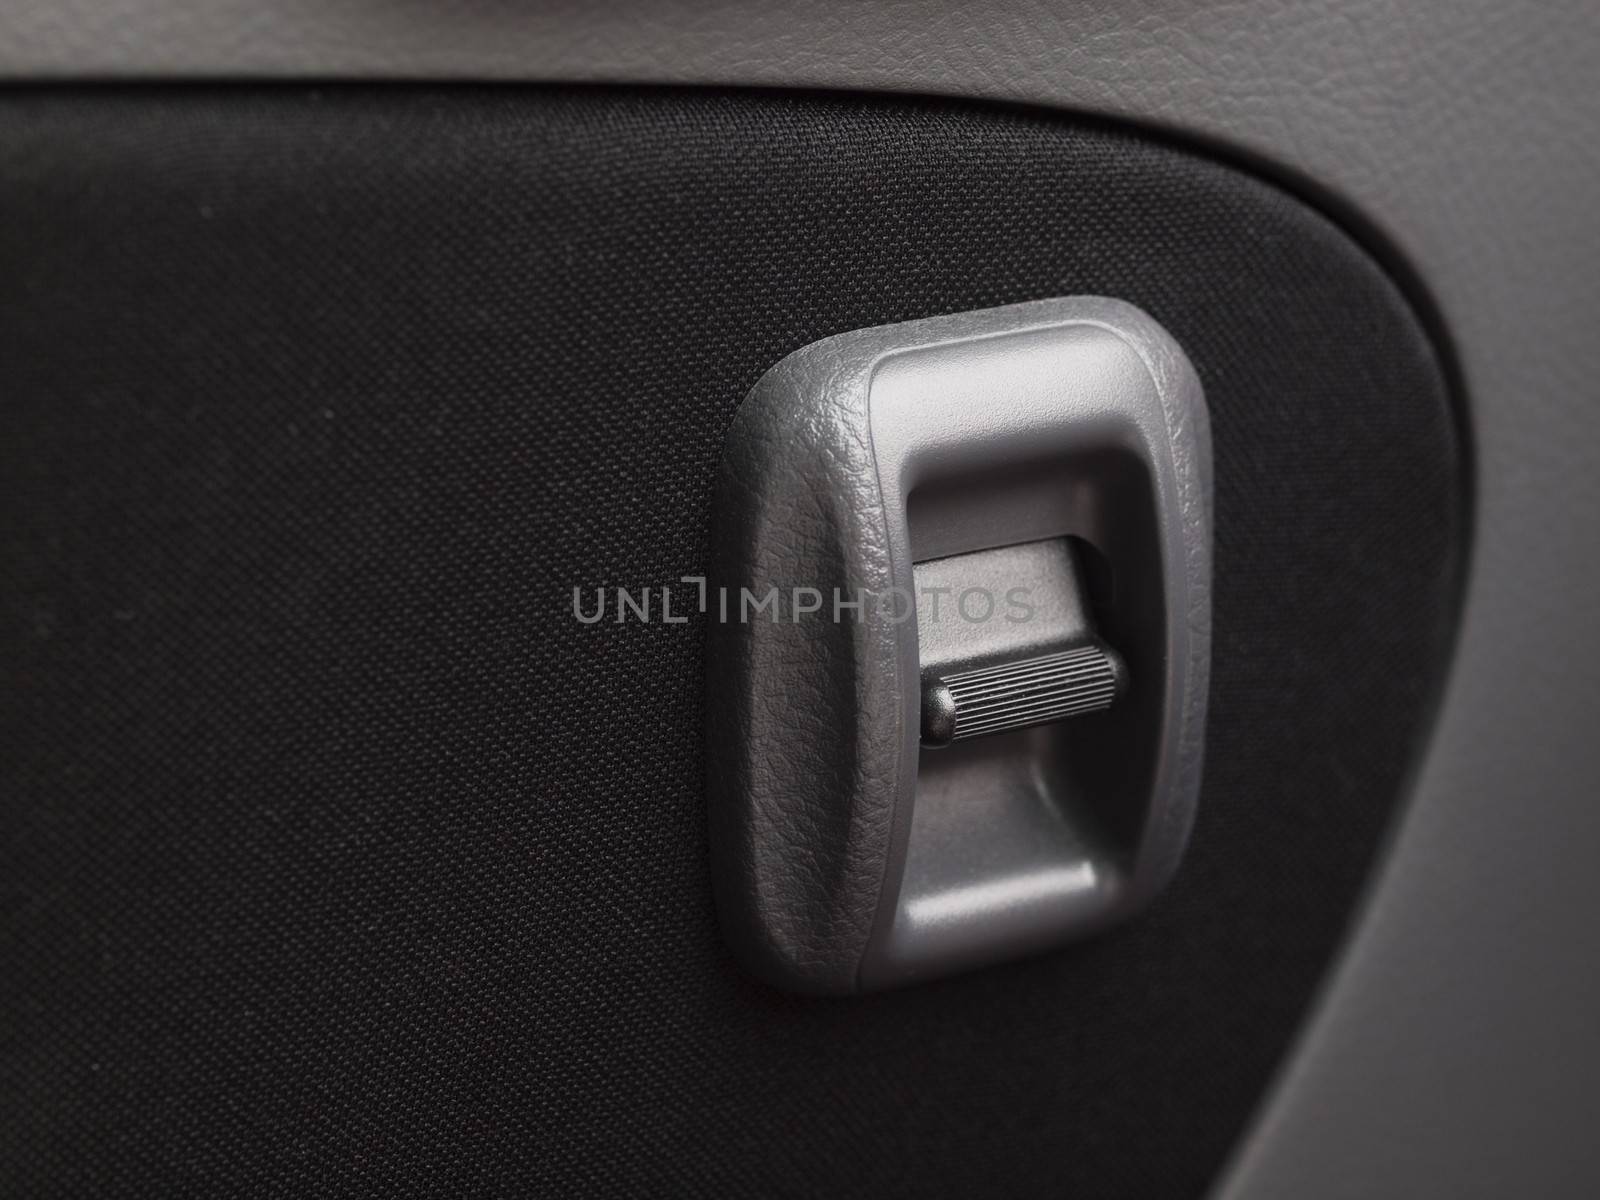 car interior detail with power window control unit